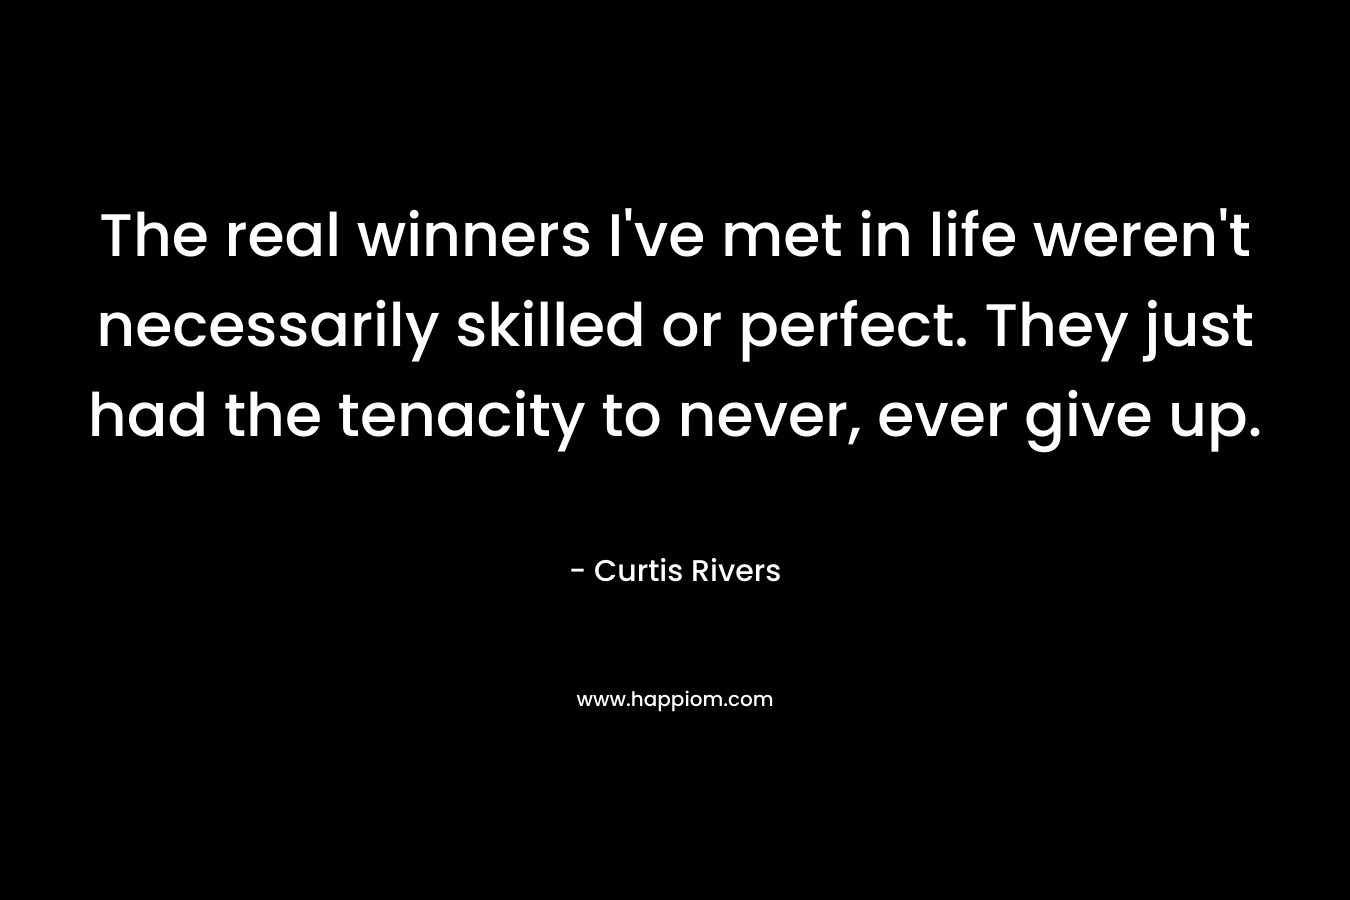 The real winners I’ve met in life weren’t necessarily skilled or perfect. They just had the tenacity to never, ever give up. – Curtis Rivers